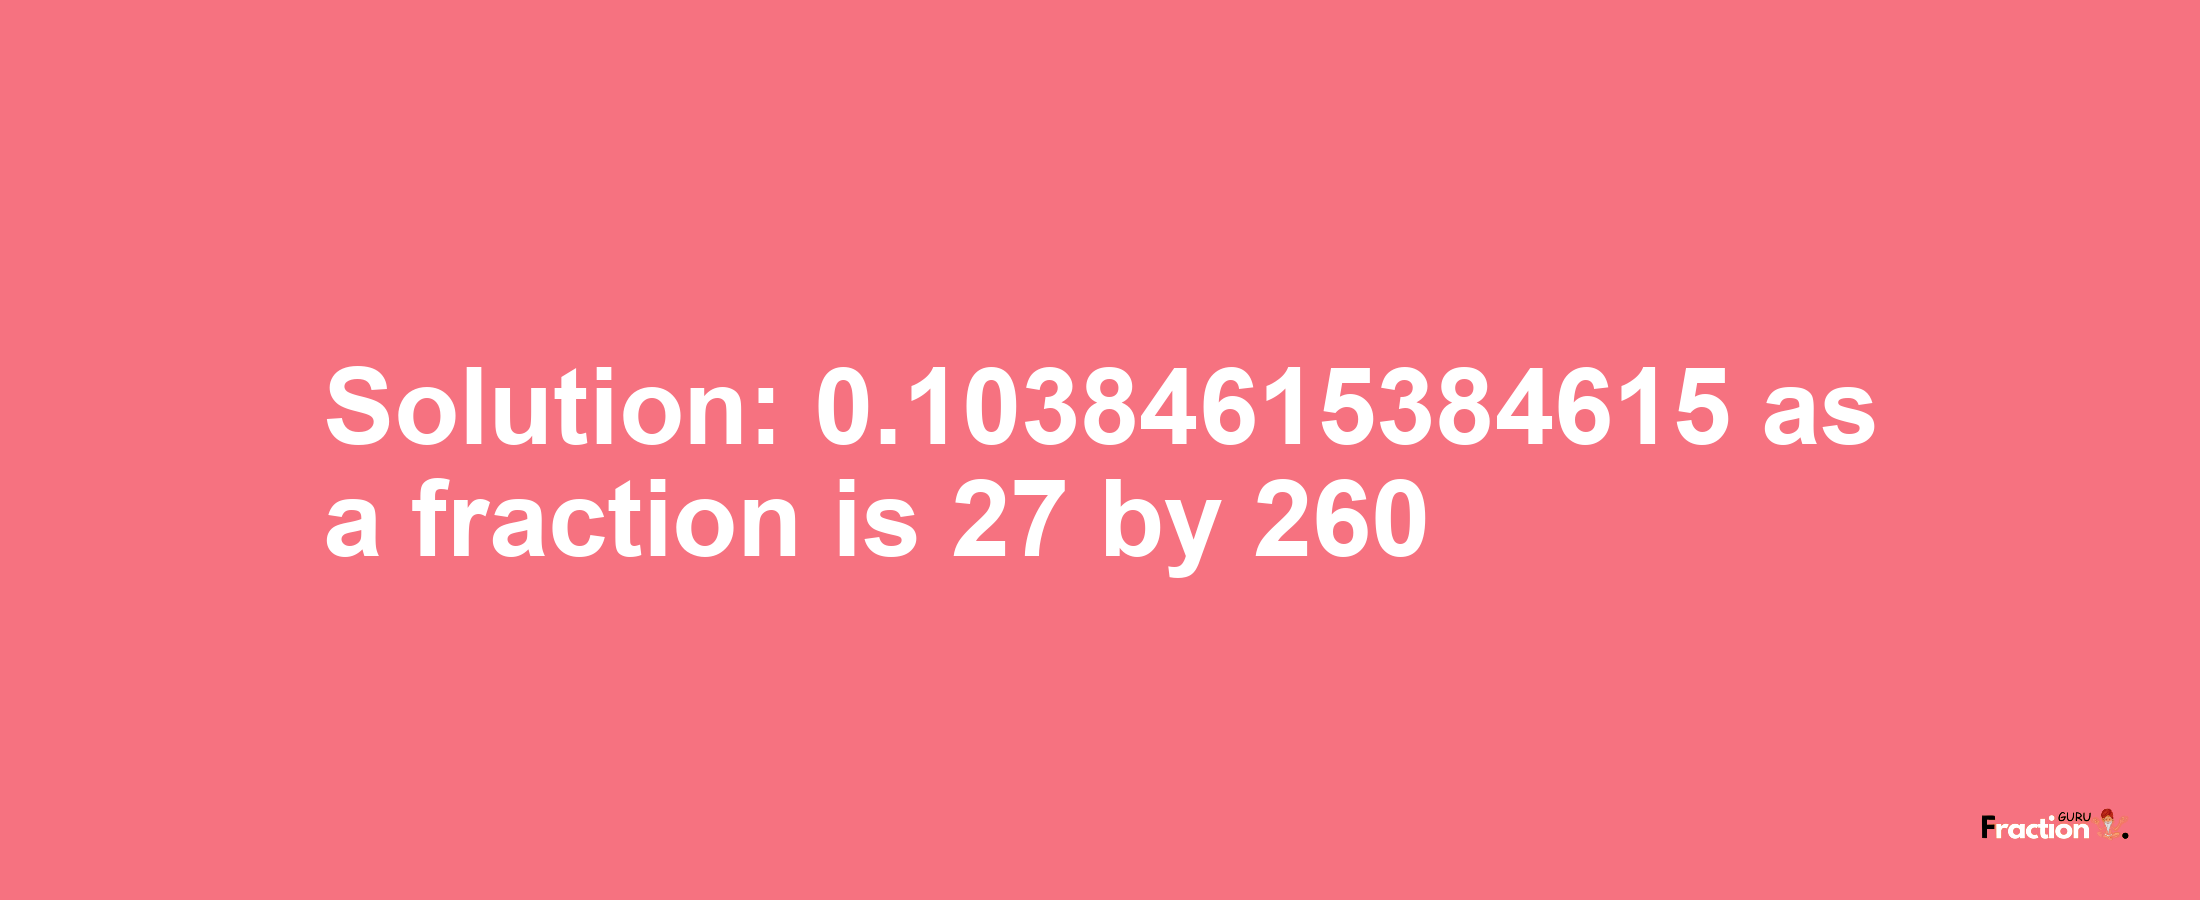 Solution:0.10384615384615 as a fraction is 27/260